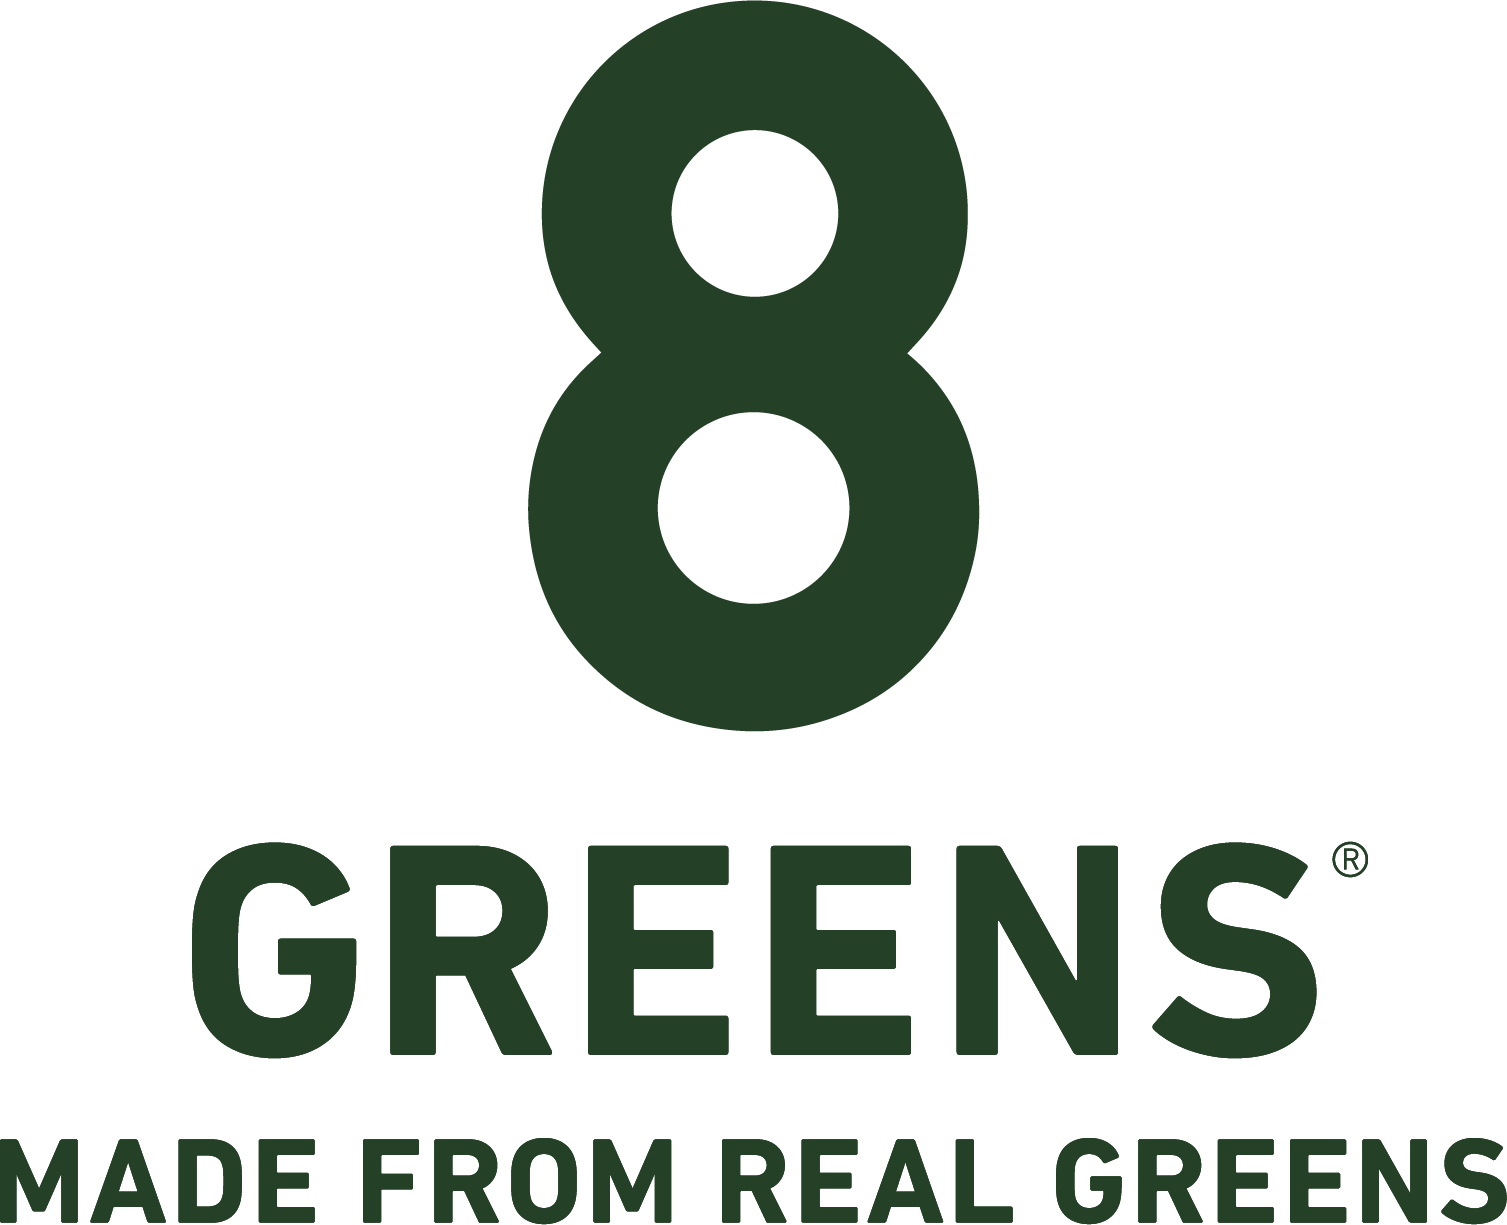 8Greens Gummies Made From Real Greens 60-Day Supply & 2 Lollipops